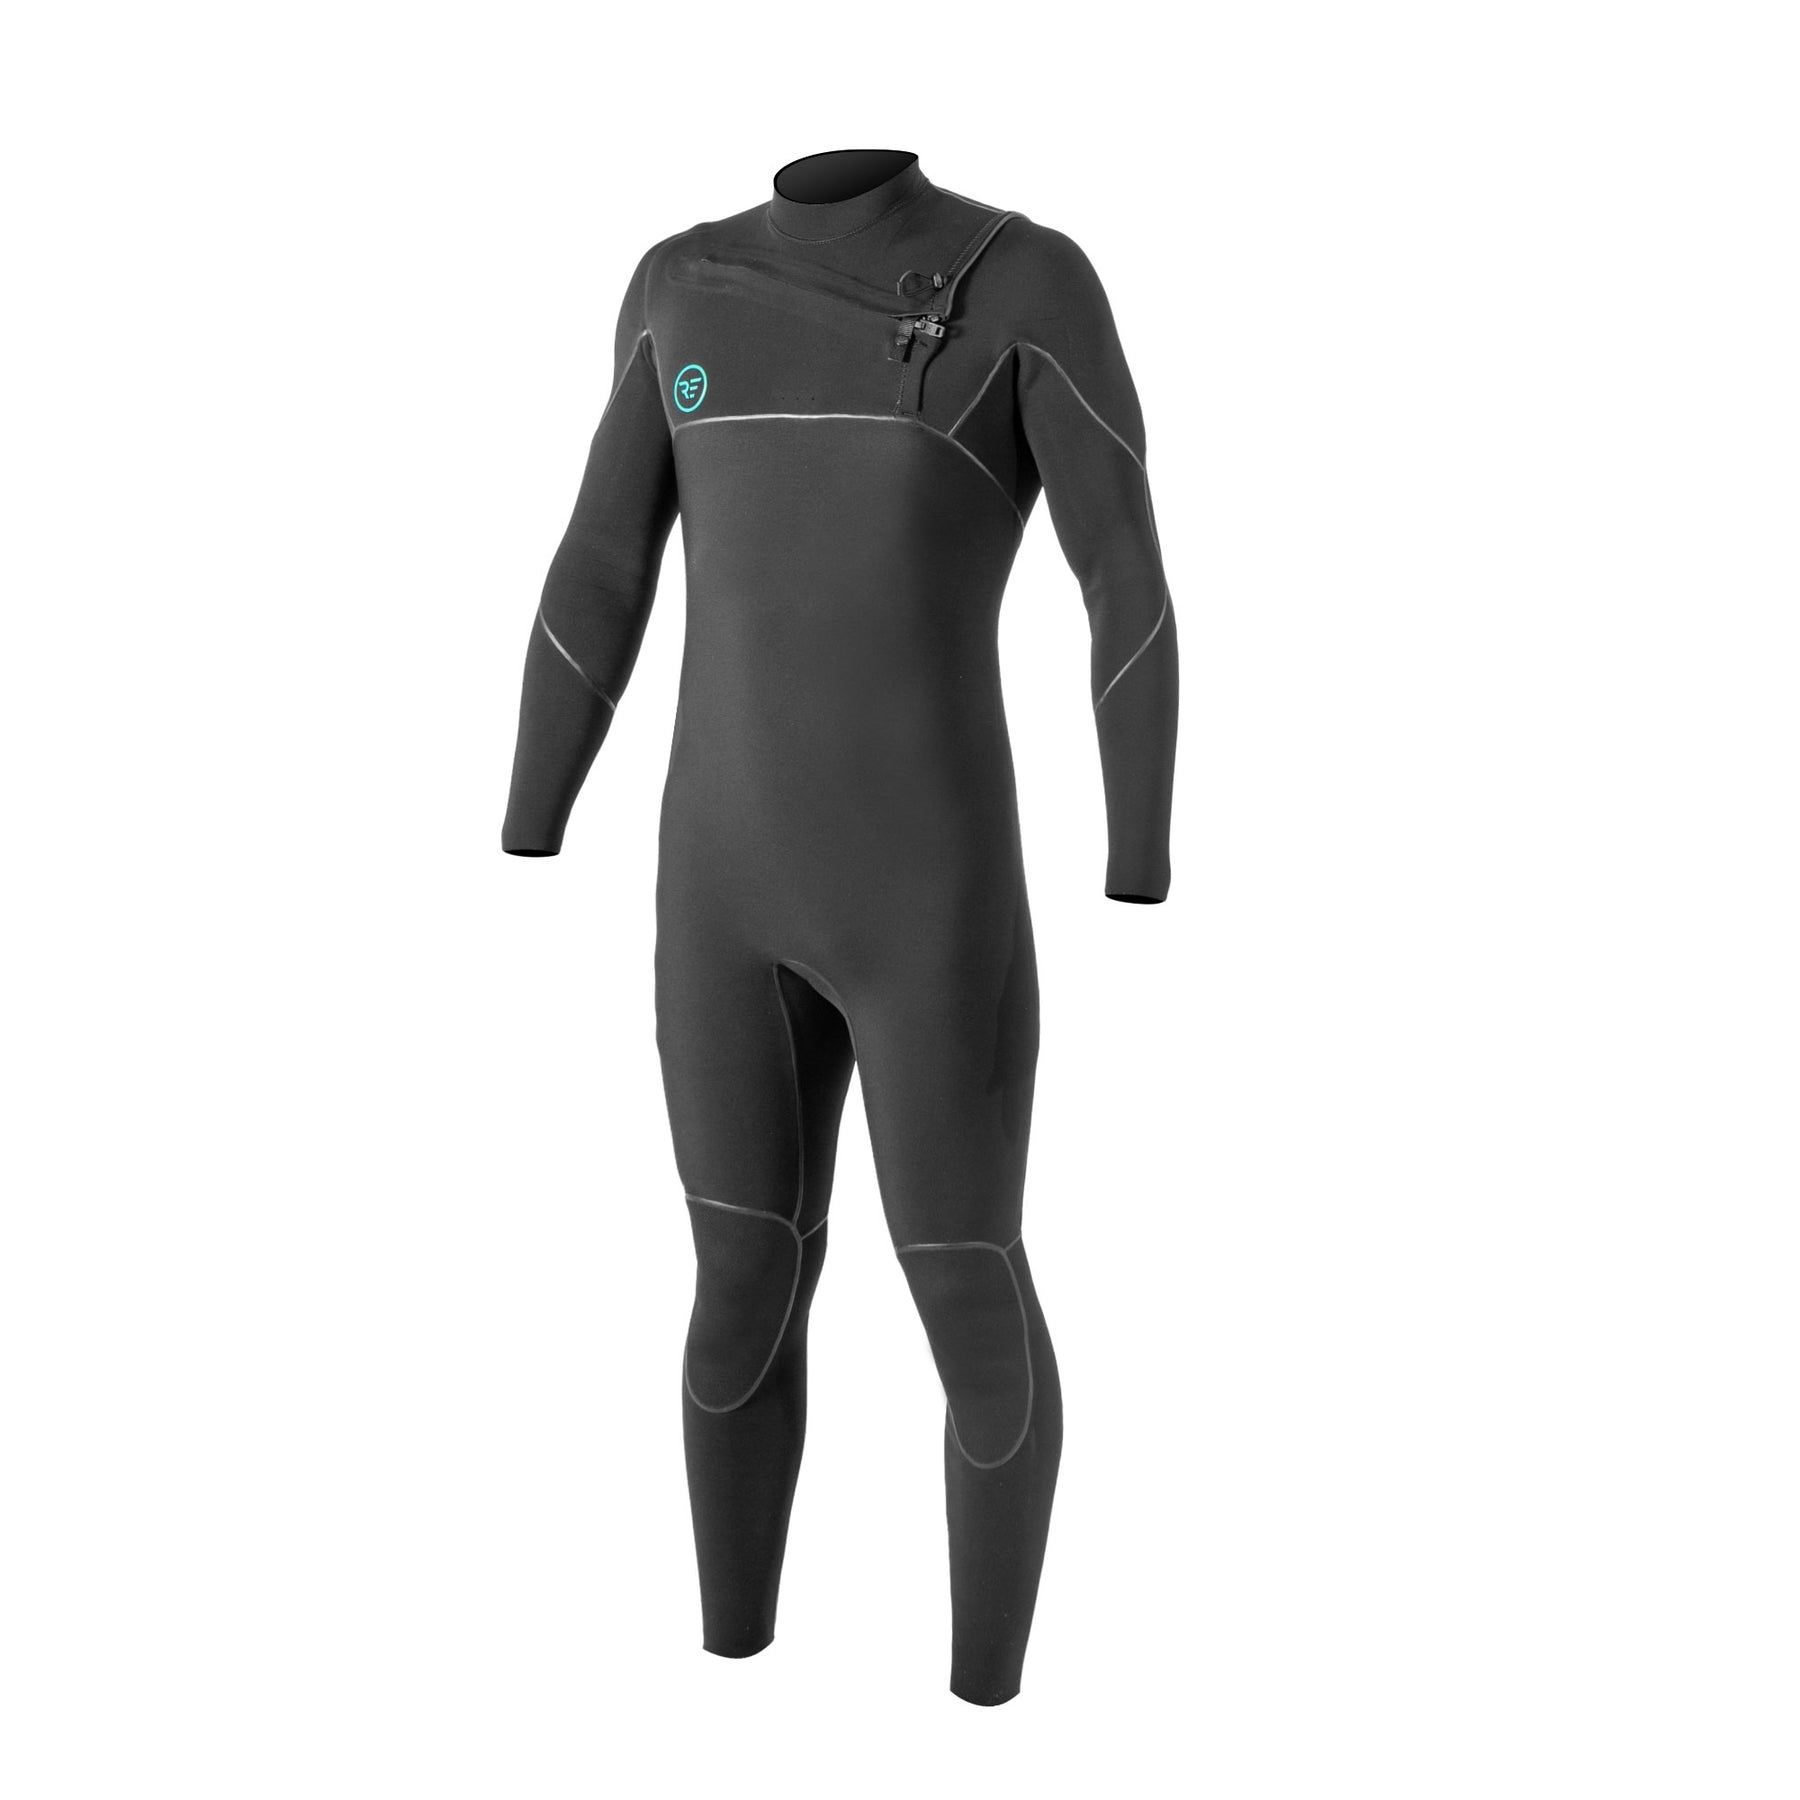 Ride Engine Apoc 4/3 FZ Wetsuit – L – The Foiling Collective